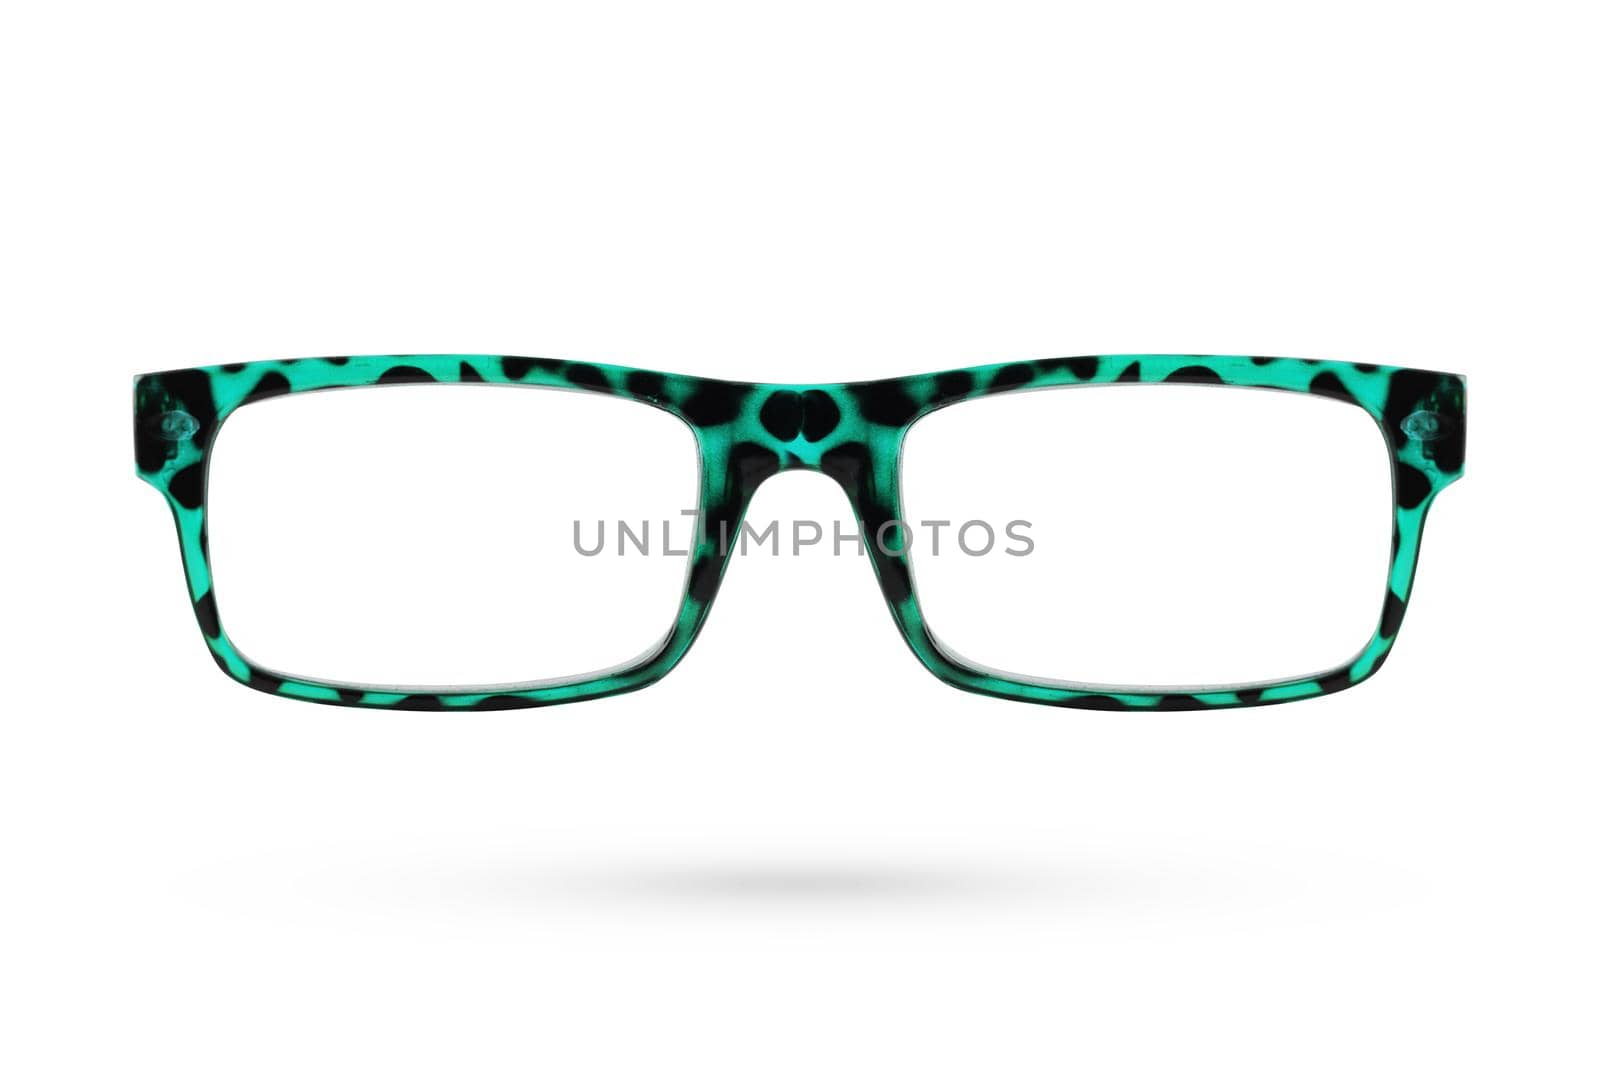 Fashion glasses style plastic-framed isolated on white background. by jayzynism